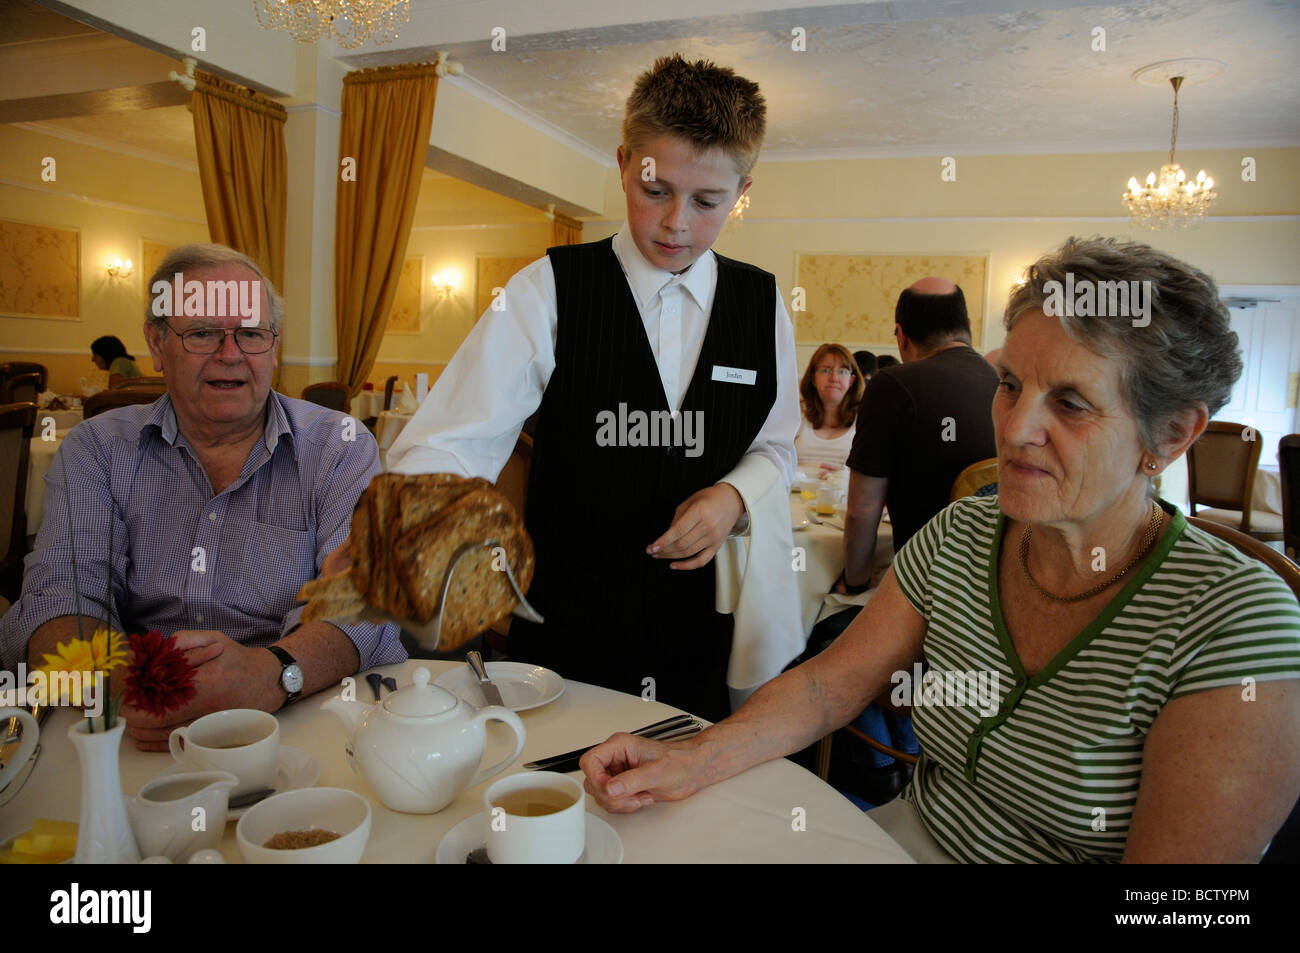 Work experience student serving breakfast in a hotel restaurant Stock Photo